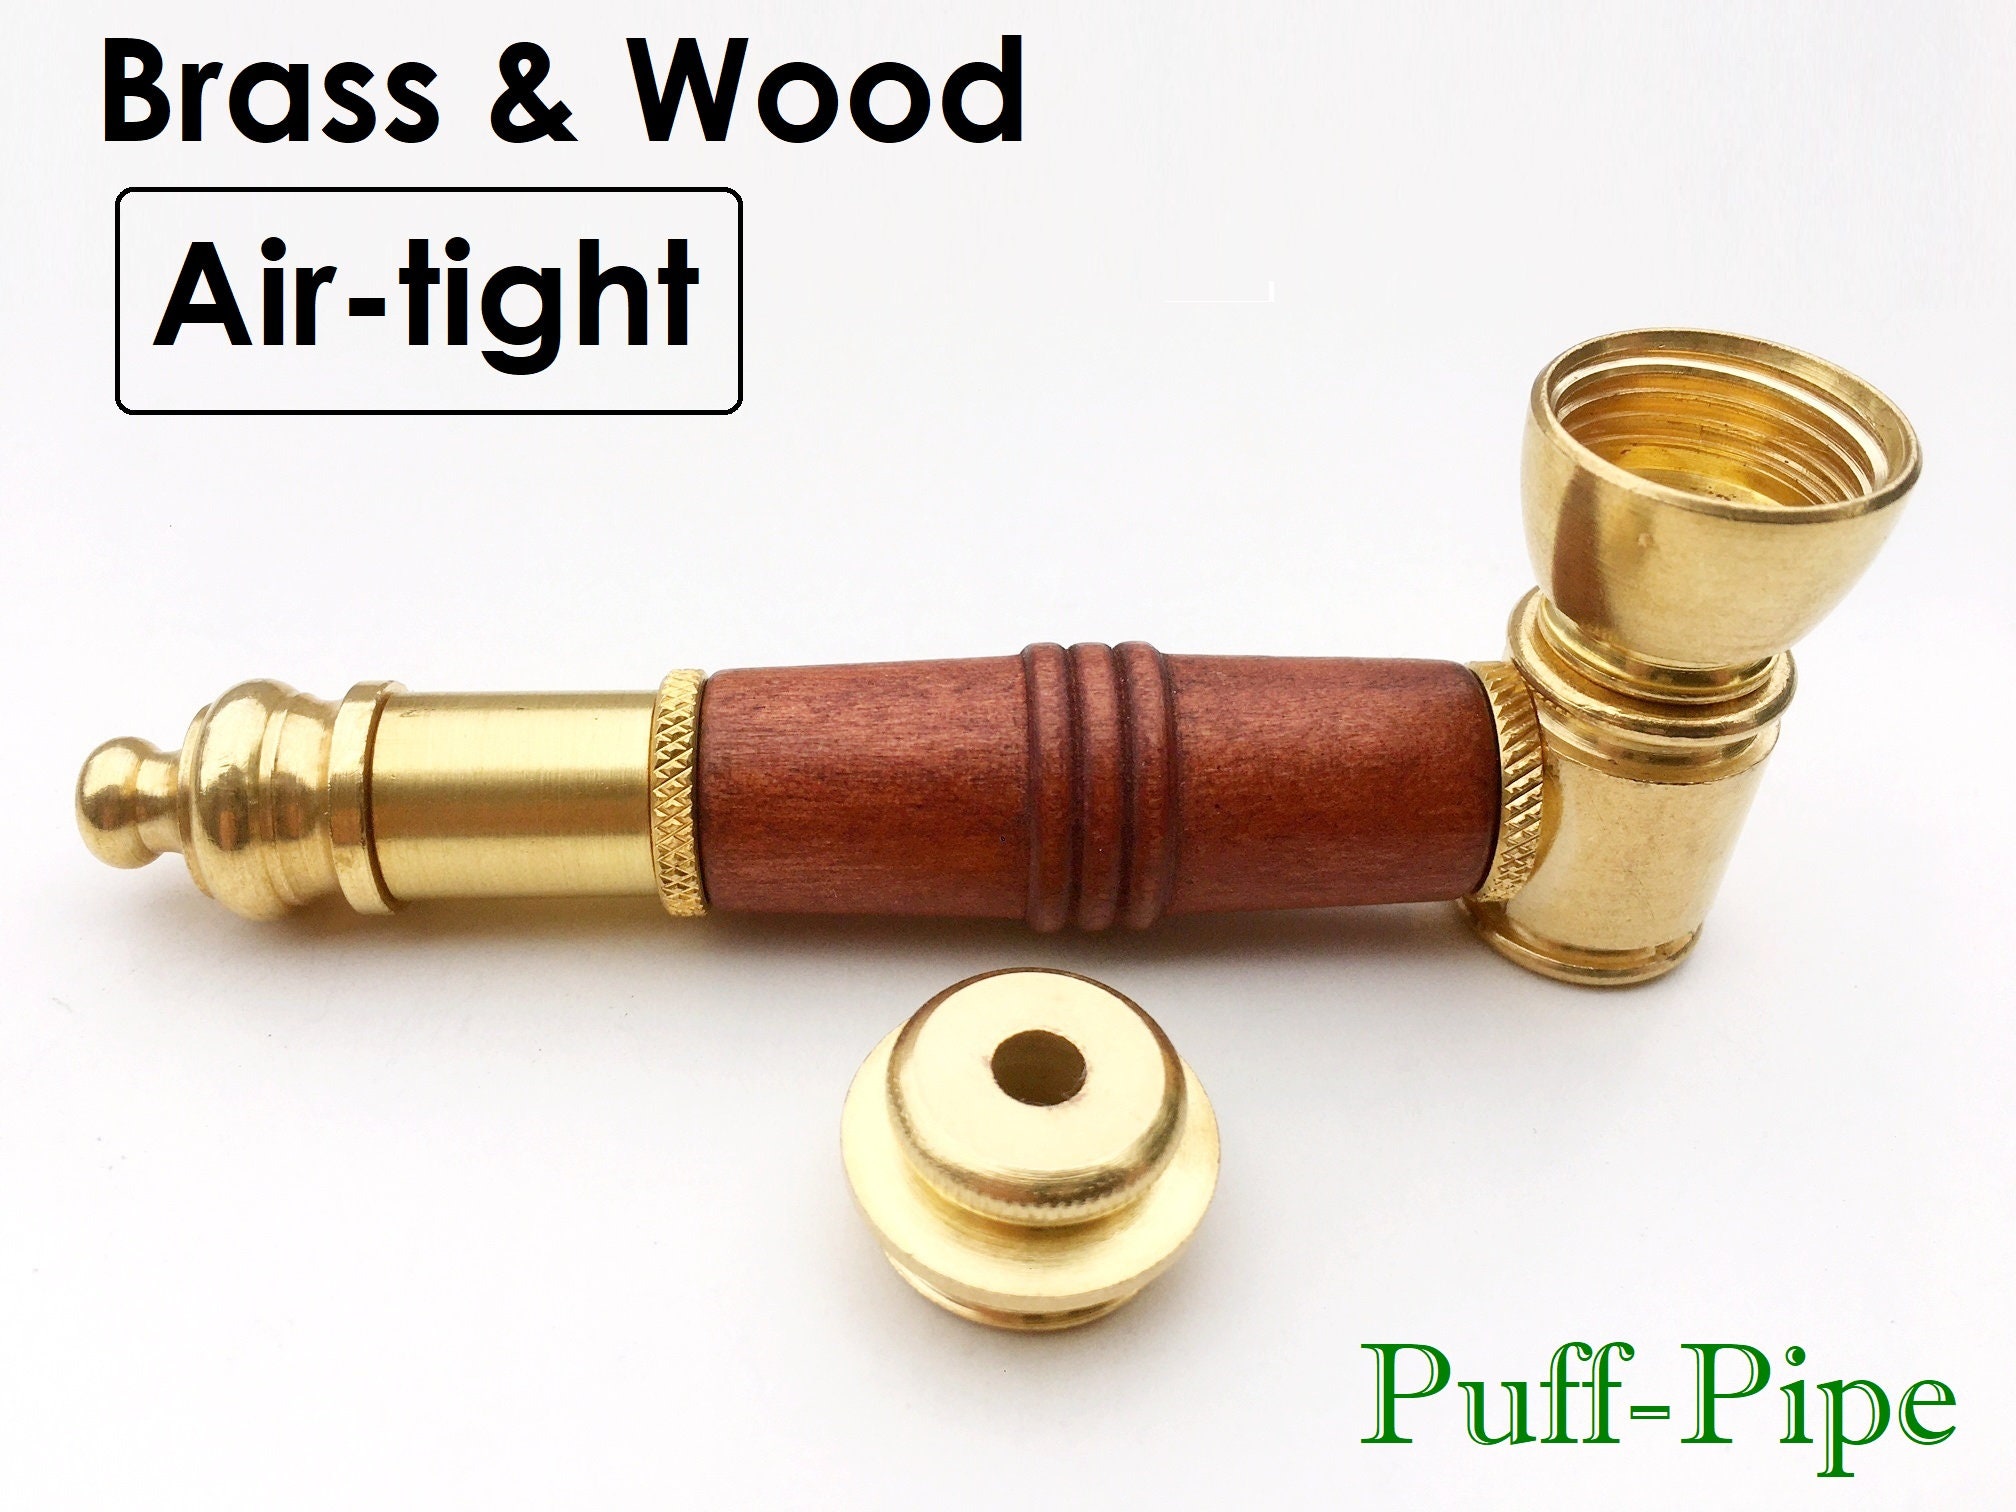 Classic Brass Proto Pipe Old School Chamber and Poker 3.5 - Puffr